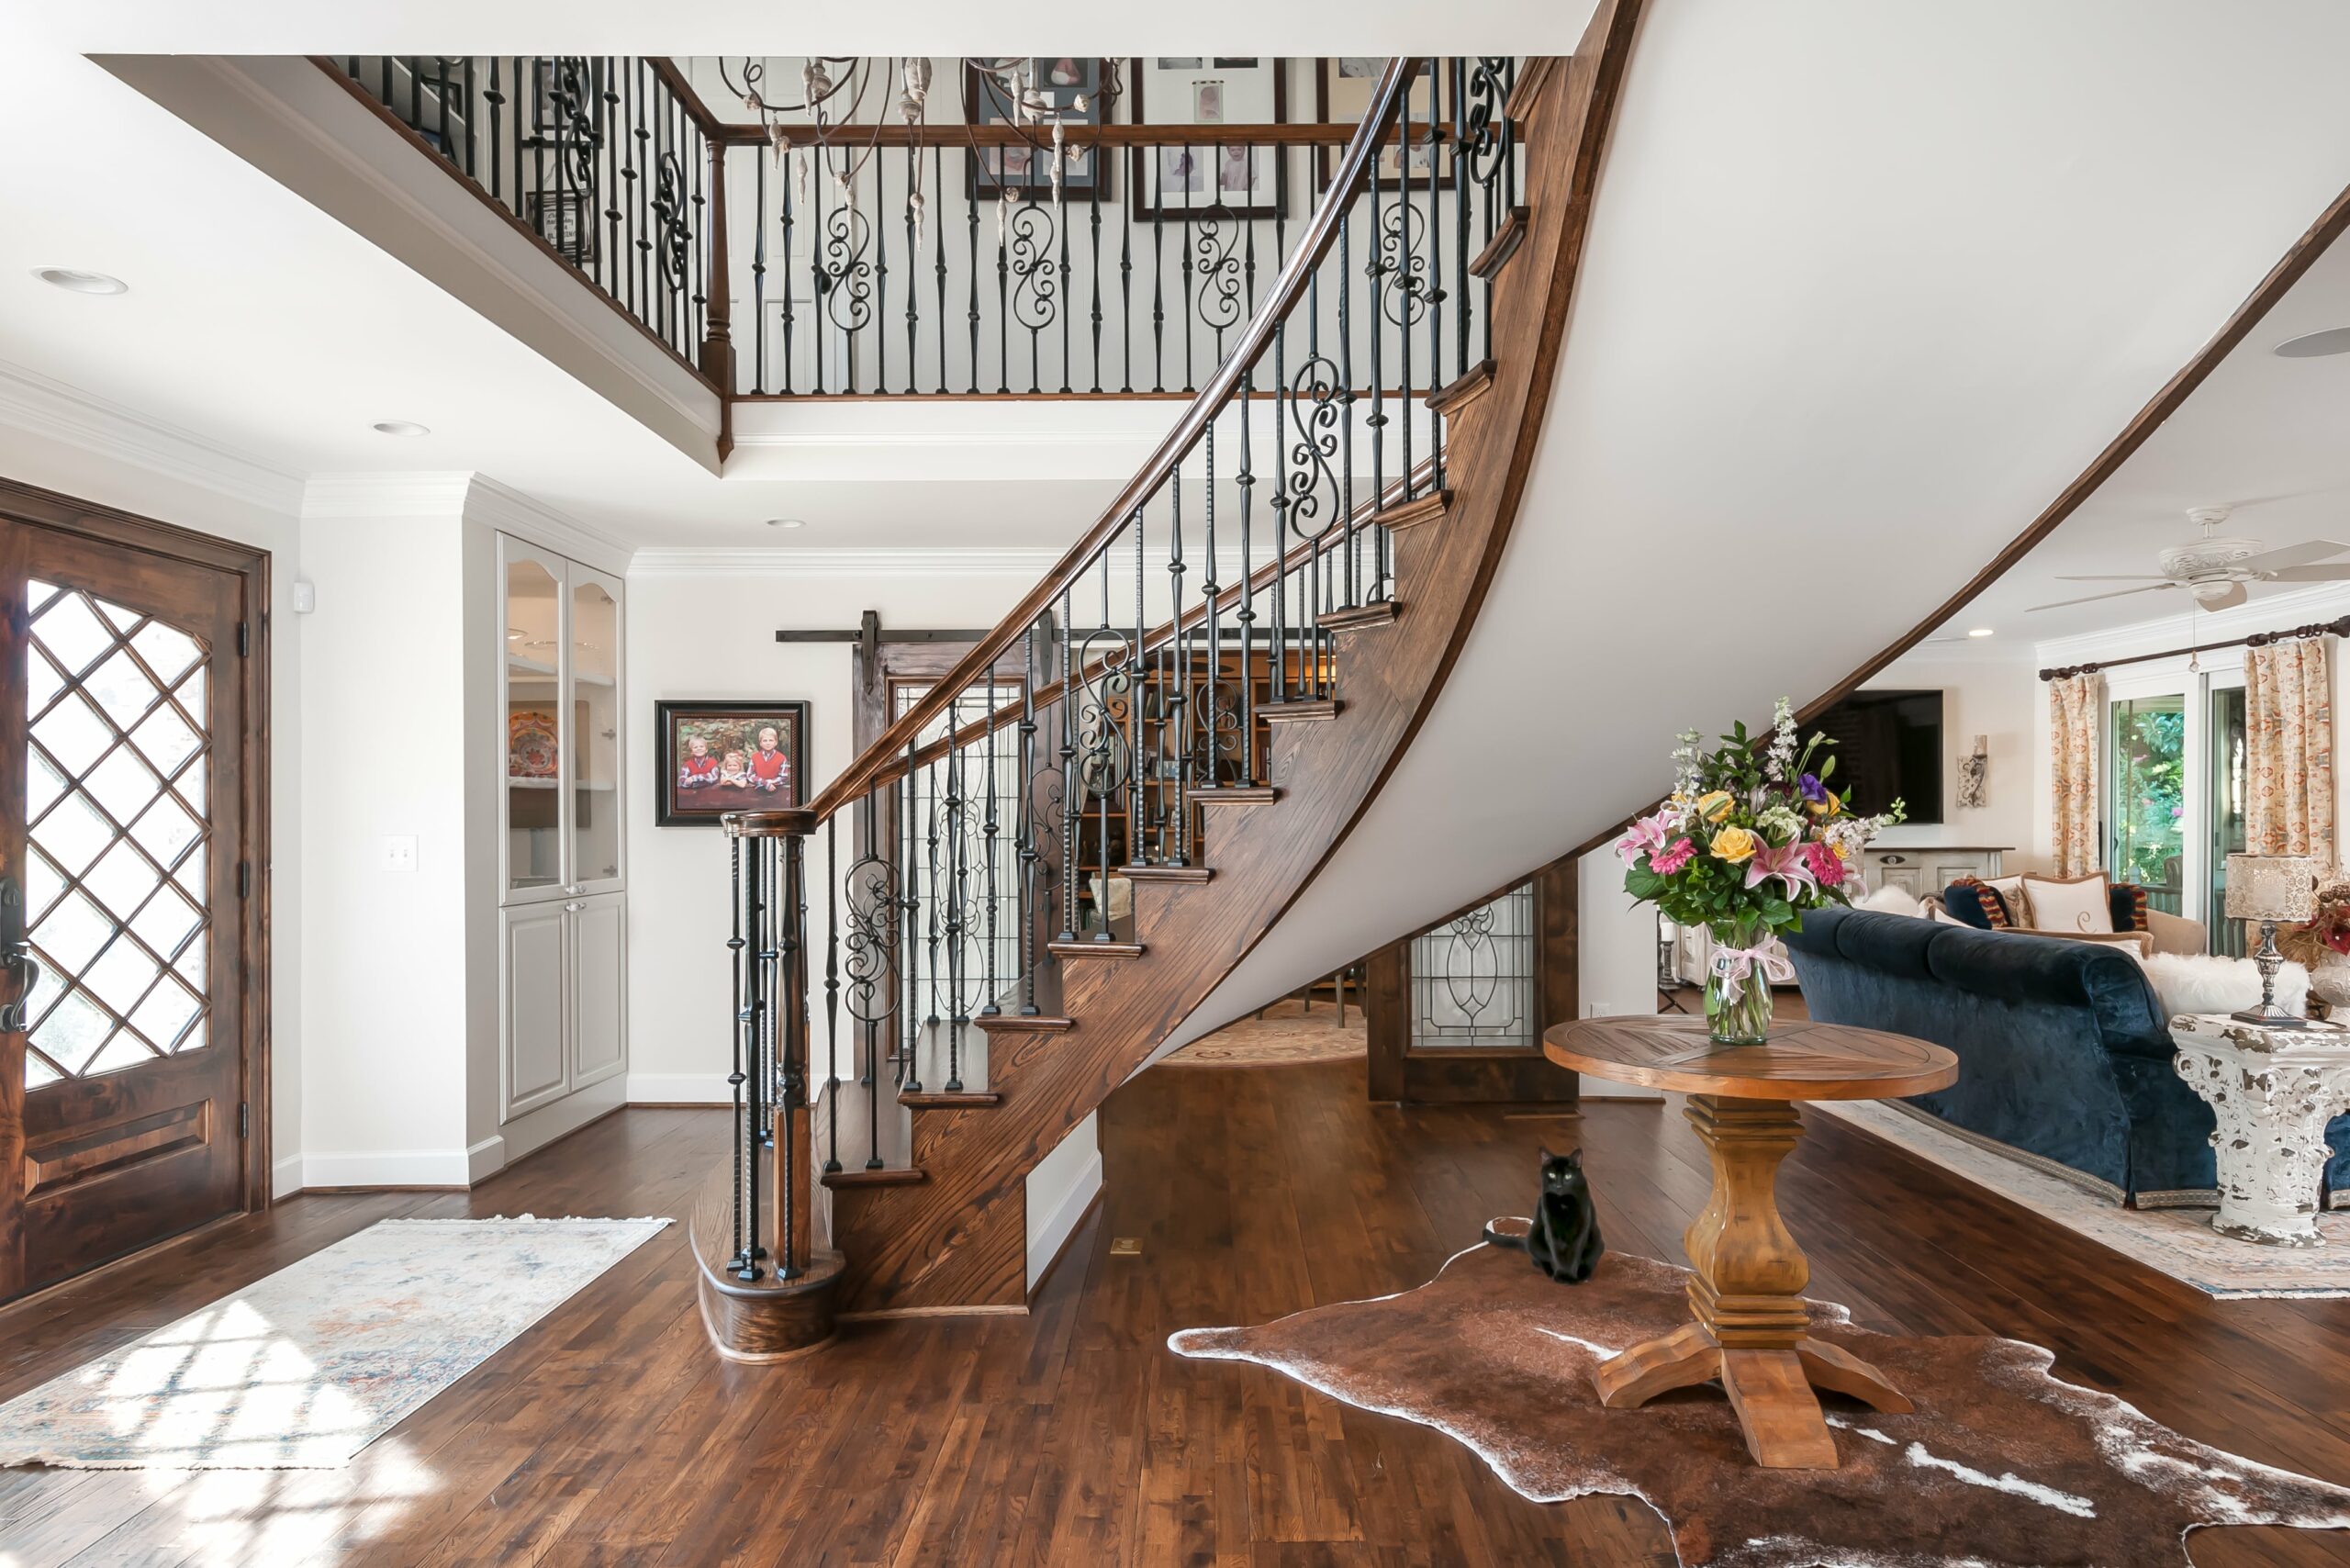 Entry way with french style wooden spiral staircase